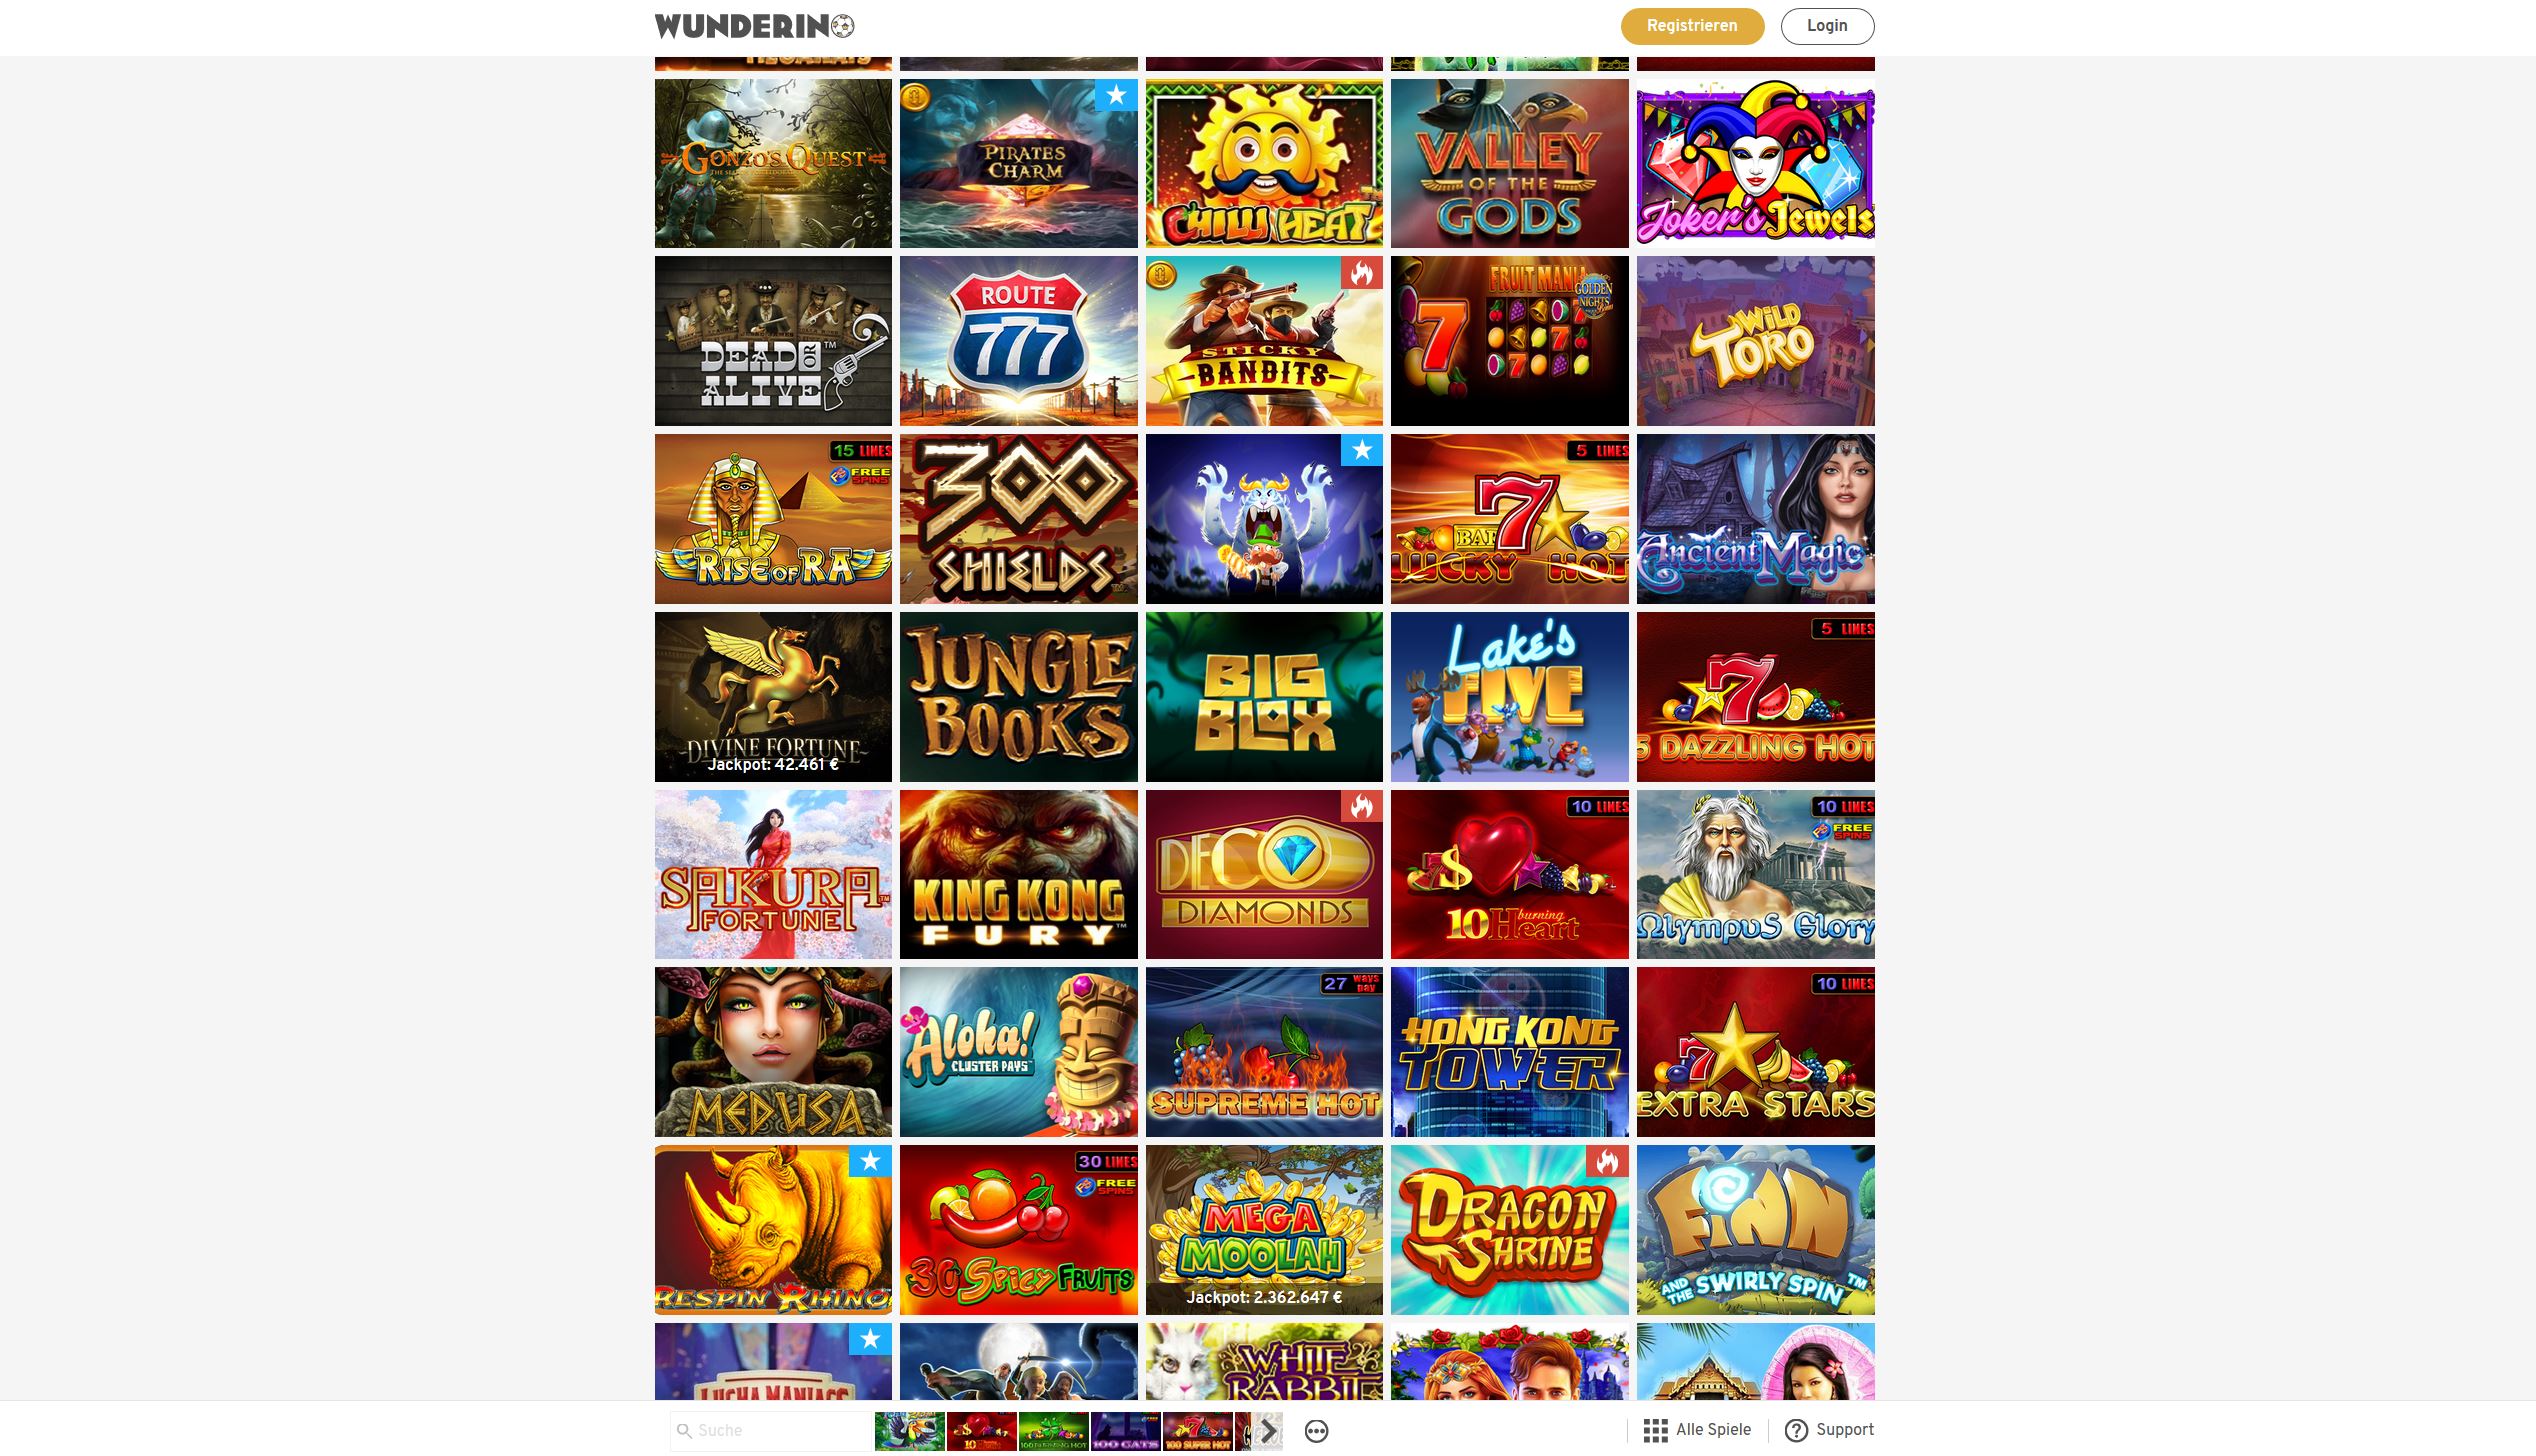 22 Very Simple Things You Can Do To Save Time With Wunderino Casino